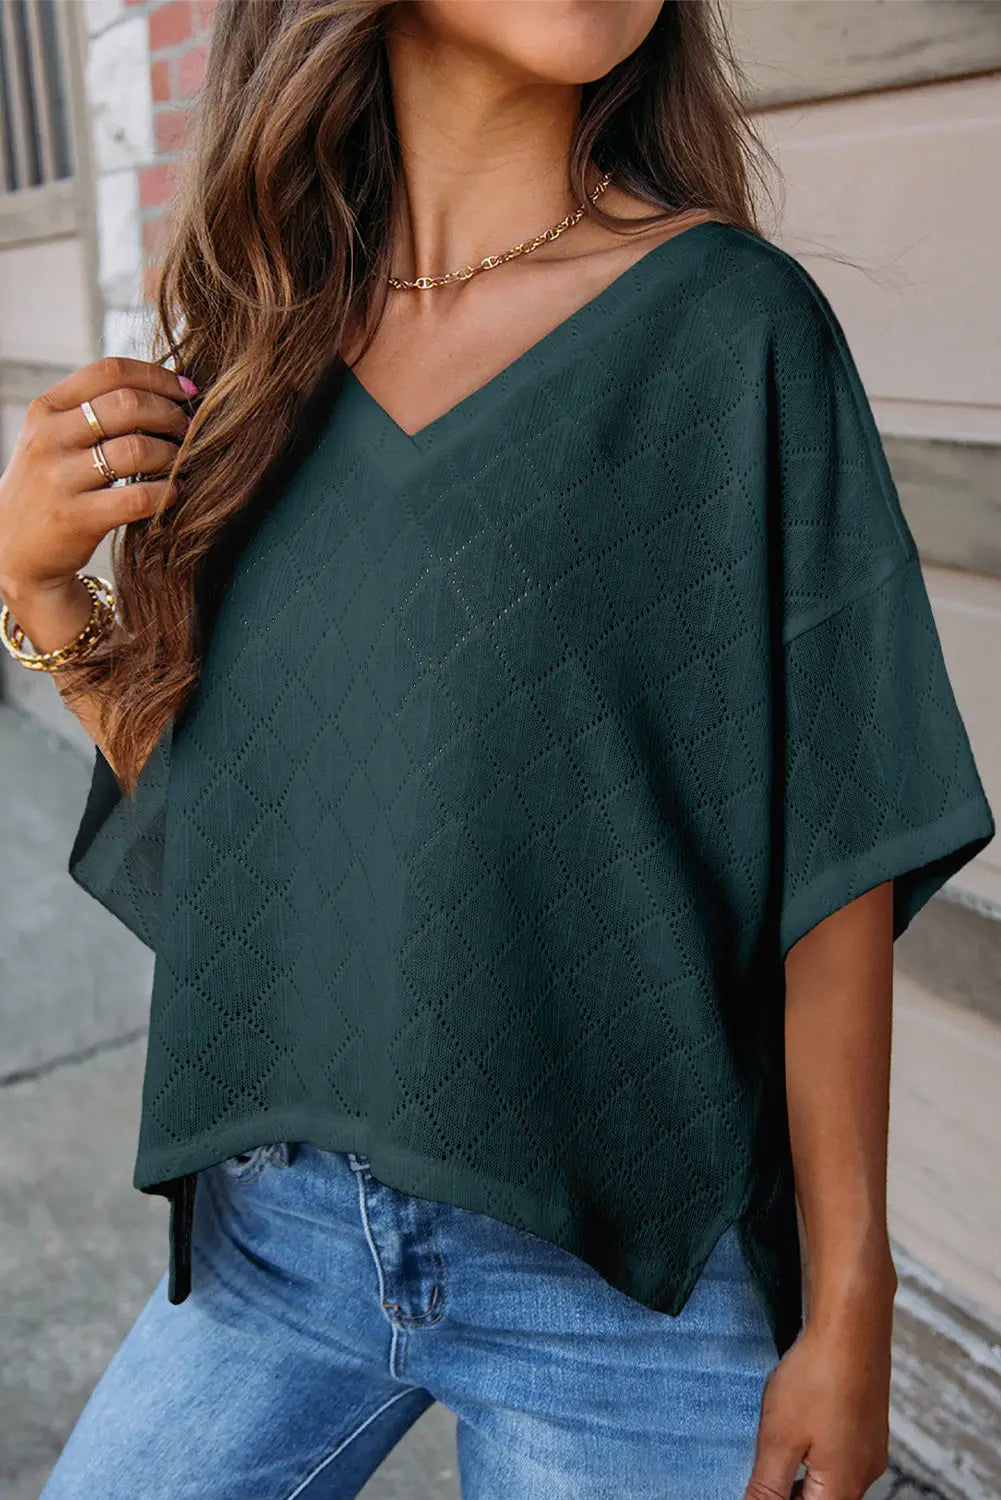 Green v neck knitted flowy blouse - blackish / l / 100% polyester - blouses & shirts